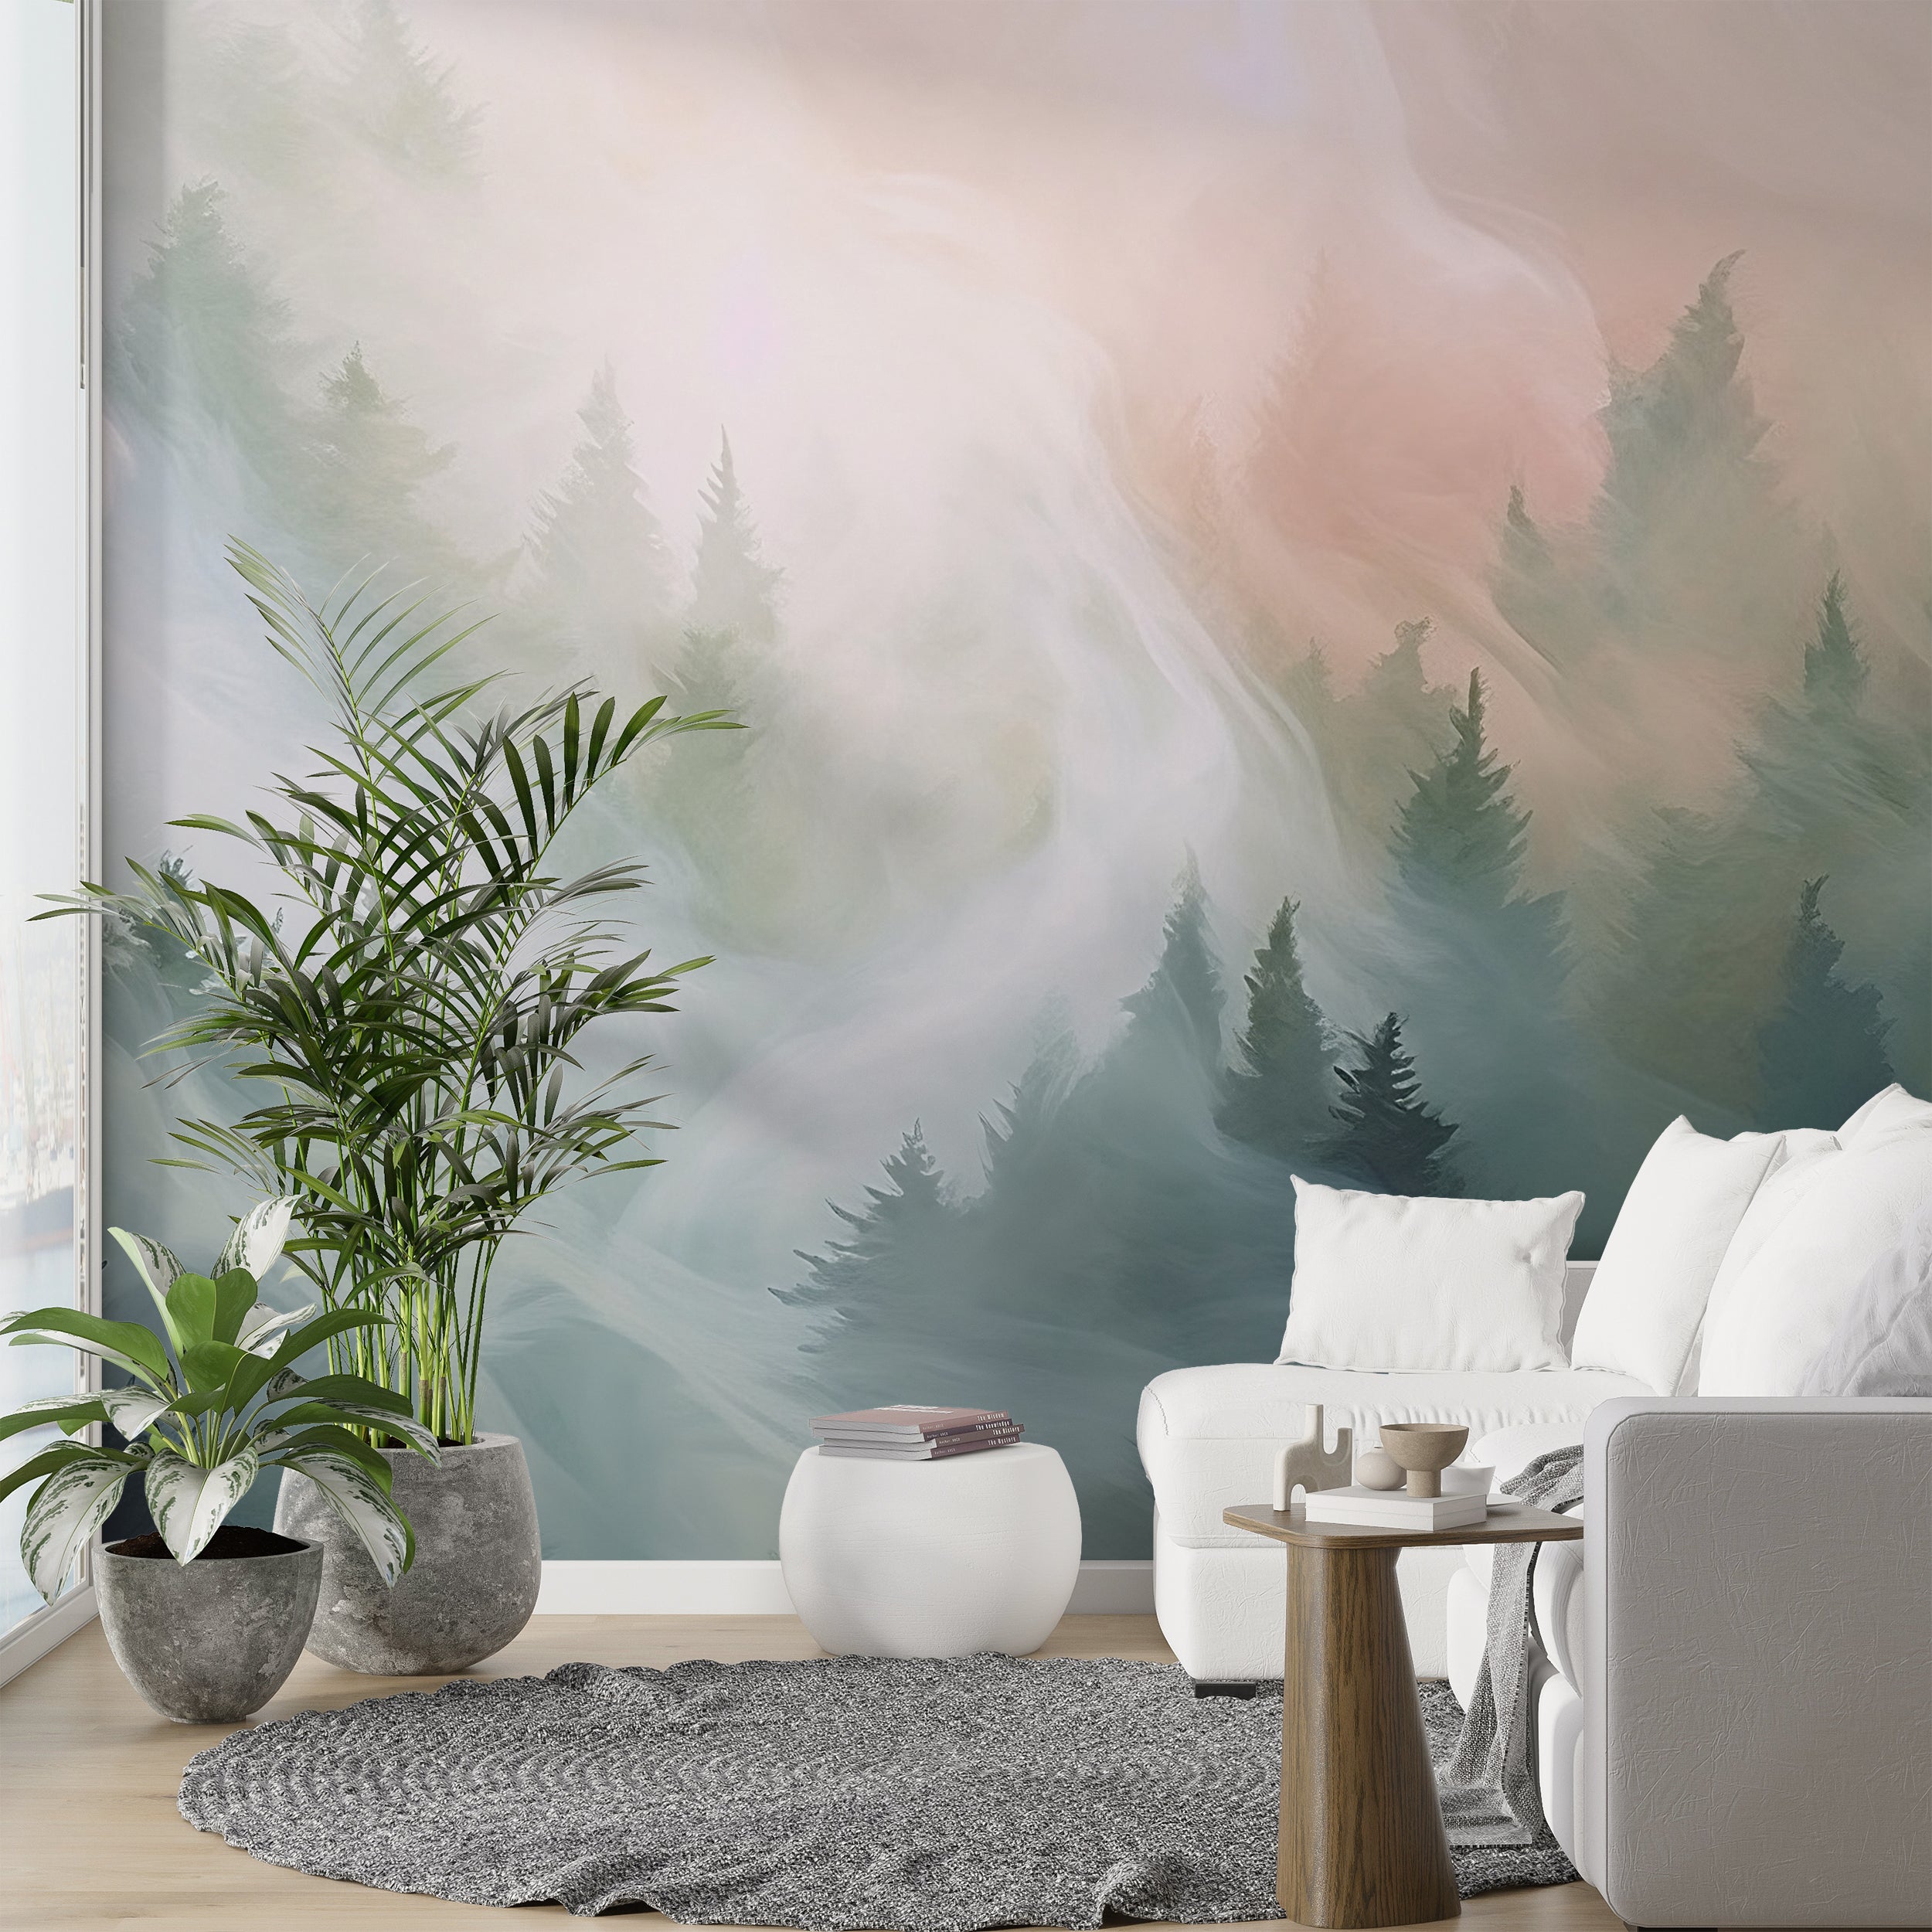 DIY Mountain View Forest Mural For Home Decor